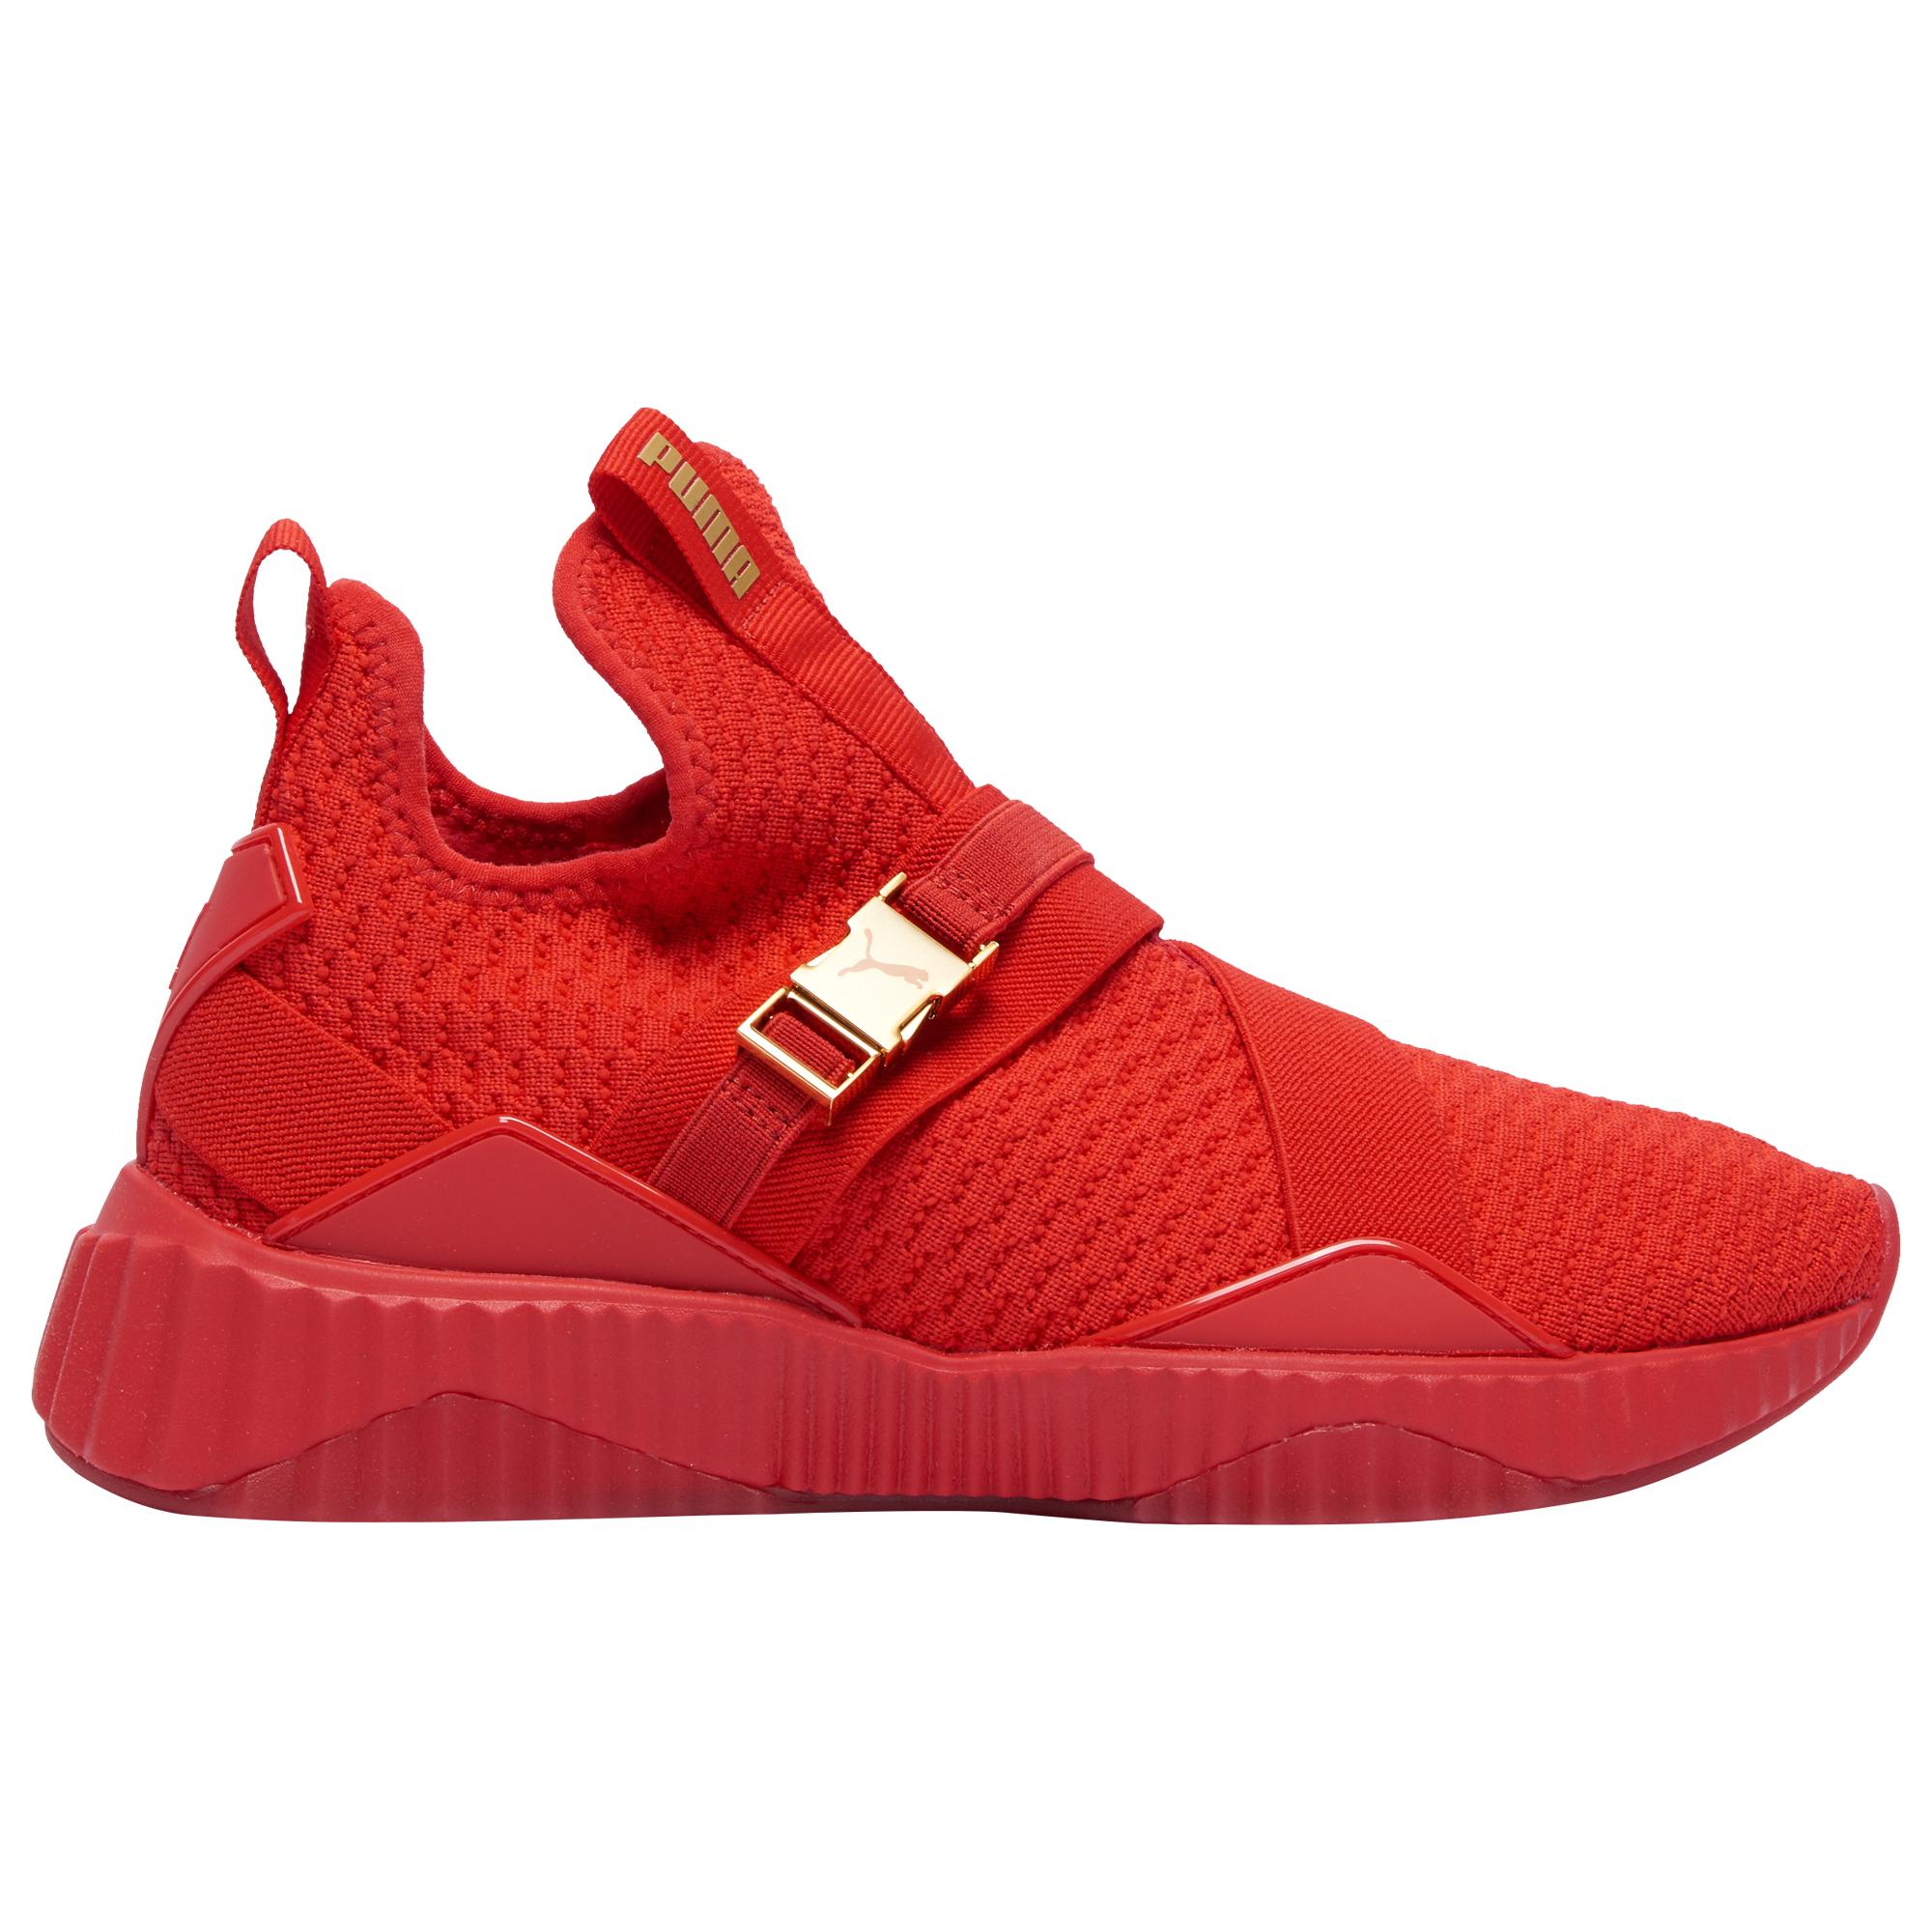 PUMA Rubber Defy Mid Buckle in Red 